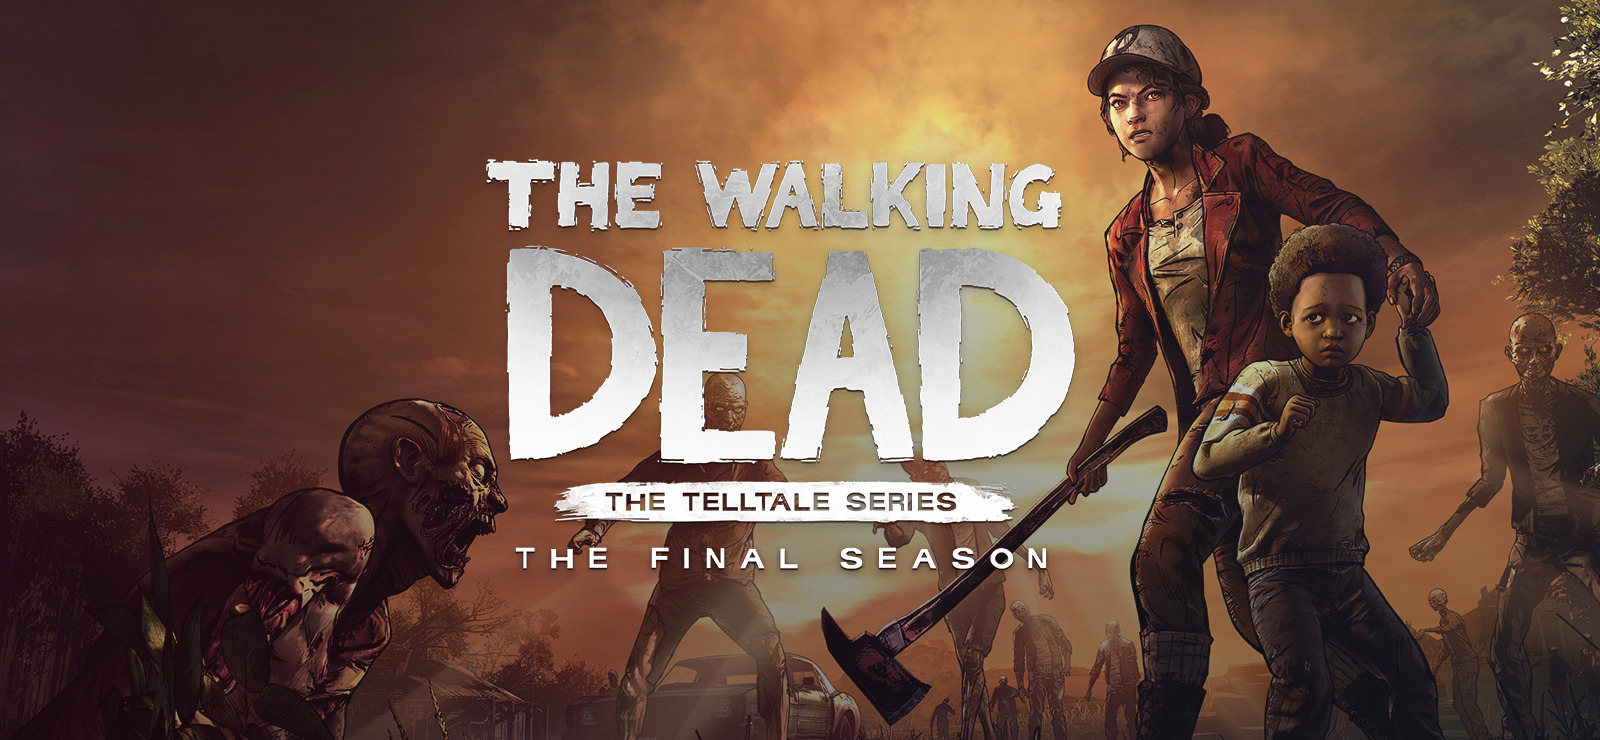 The walking dead game download for free pc - acaadvance